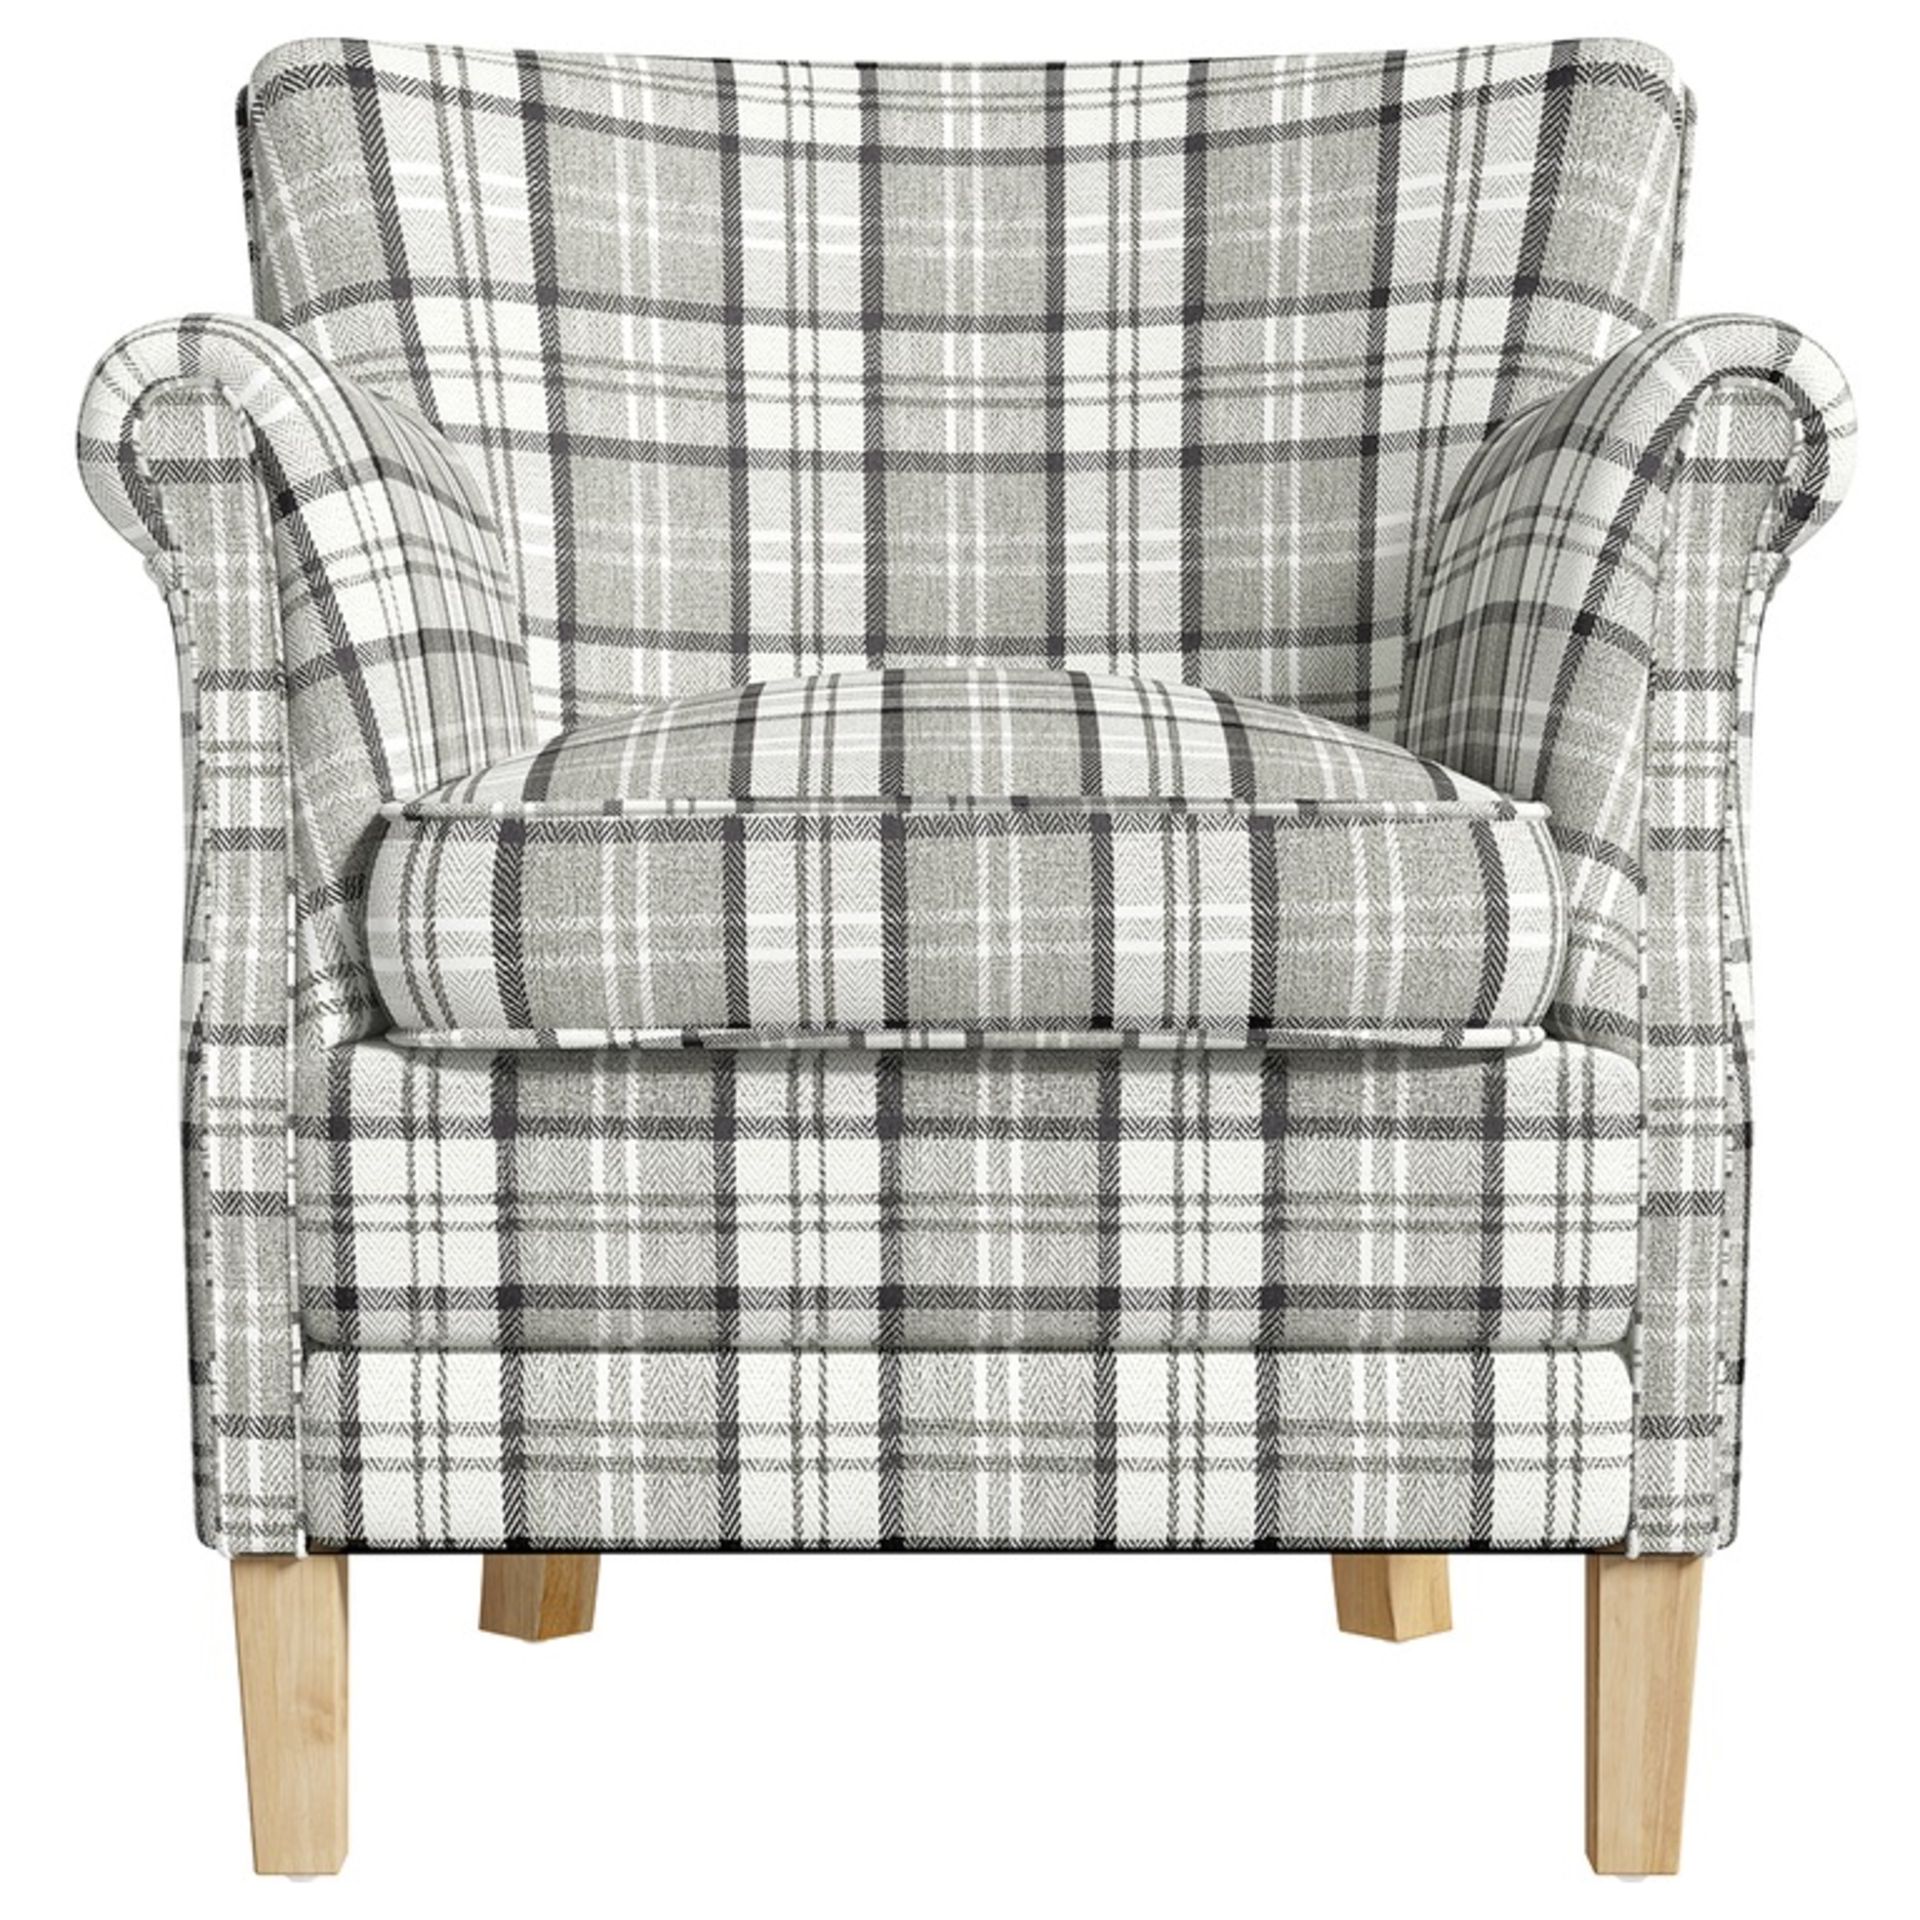 1 BRAND NEW BOXED COUNTY ARMCHAIR IN GRAPHITE CHECK FABRIC